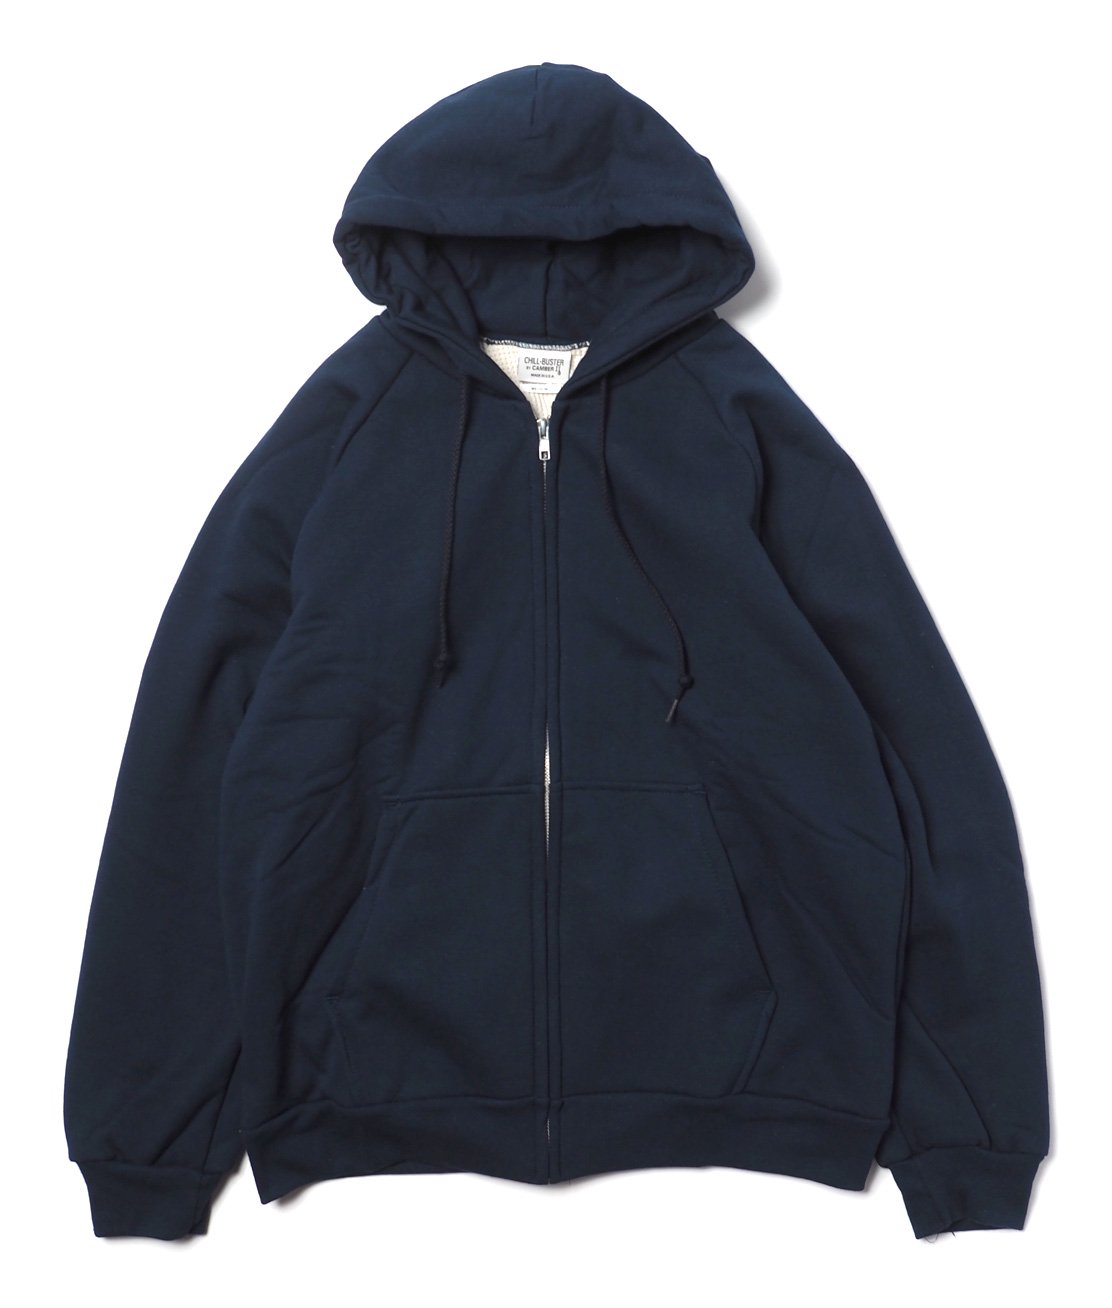 【CAMBER】#531 ZIP HOODED CHILL BUSTER - NAVY ジップパーカー 厚手 アメリカ製 - HUNKY DORY |  LEVI'S VINTAGE CLOTHING、JACKMAN、CHAMPIONなどのブランドを主に扱うセレクトショップ 通販